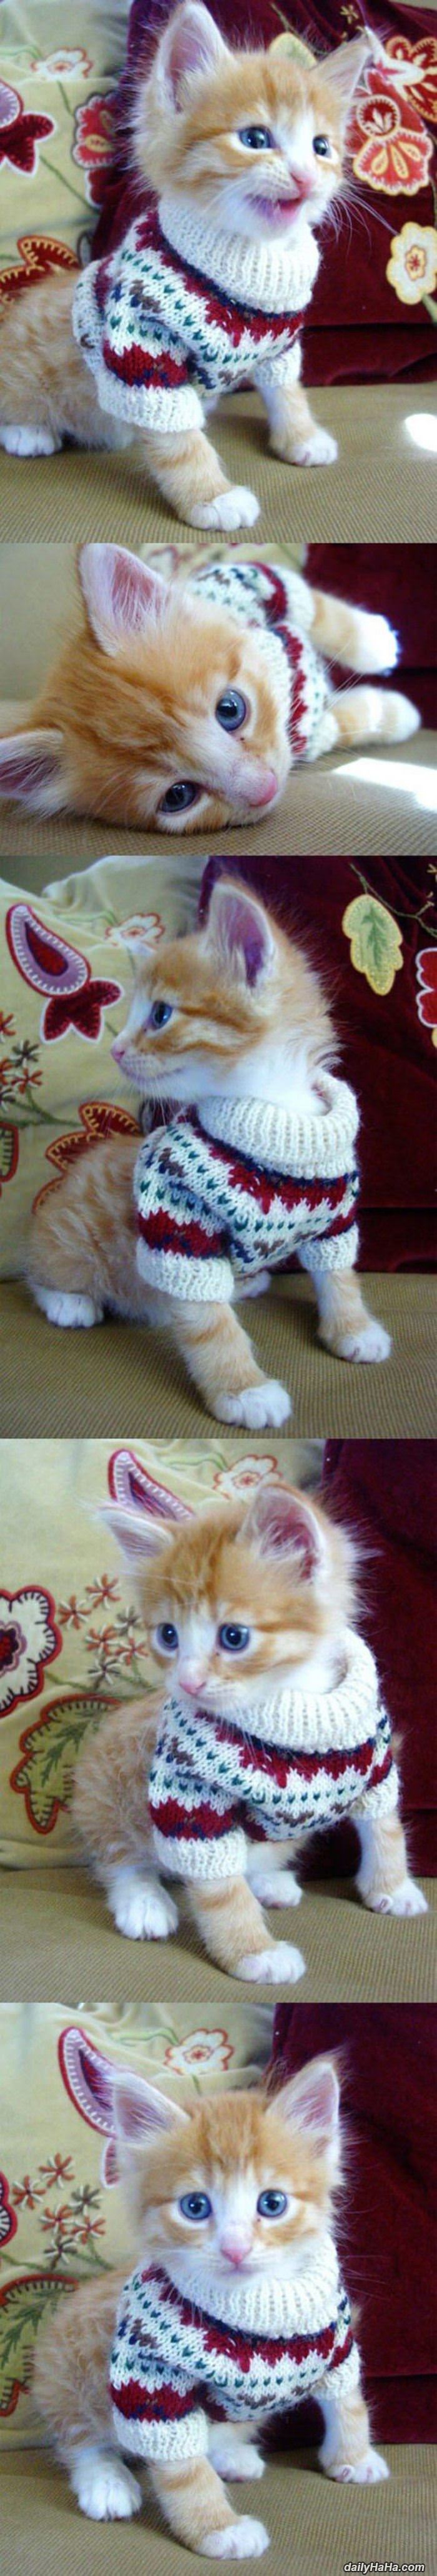 kitten sweater funny picture